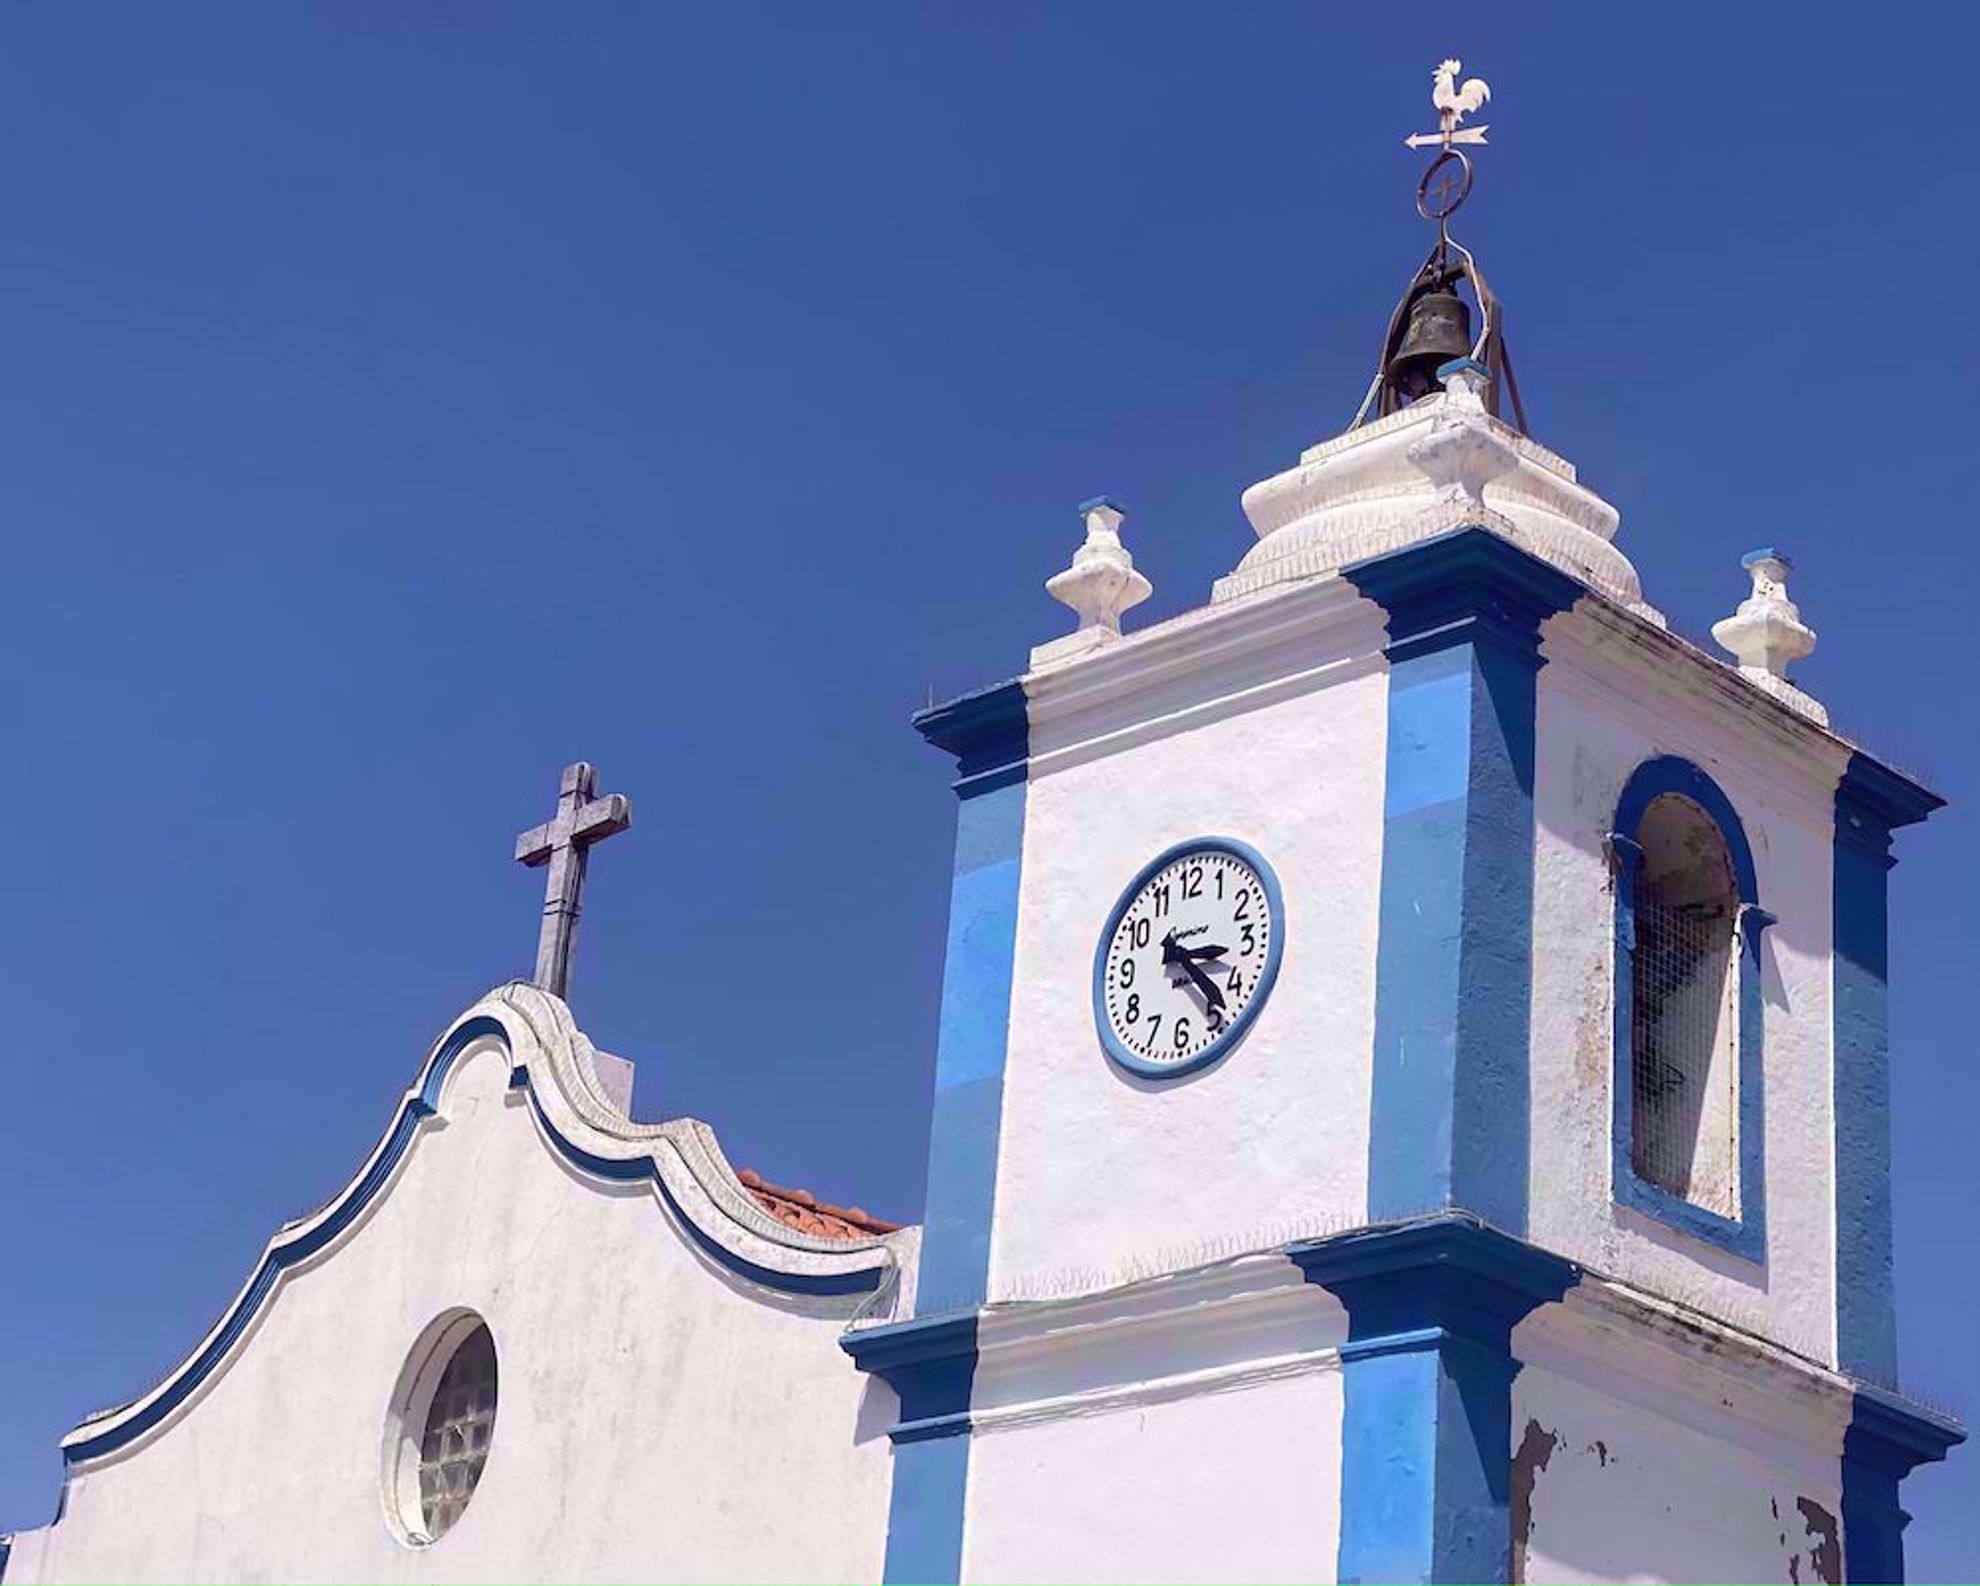 Church with blue and white